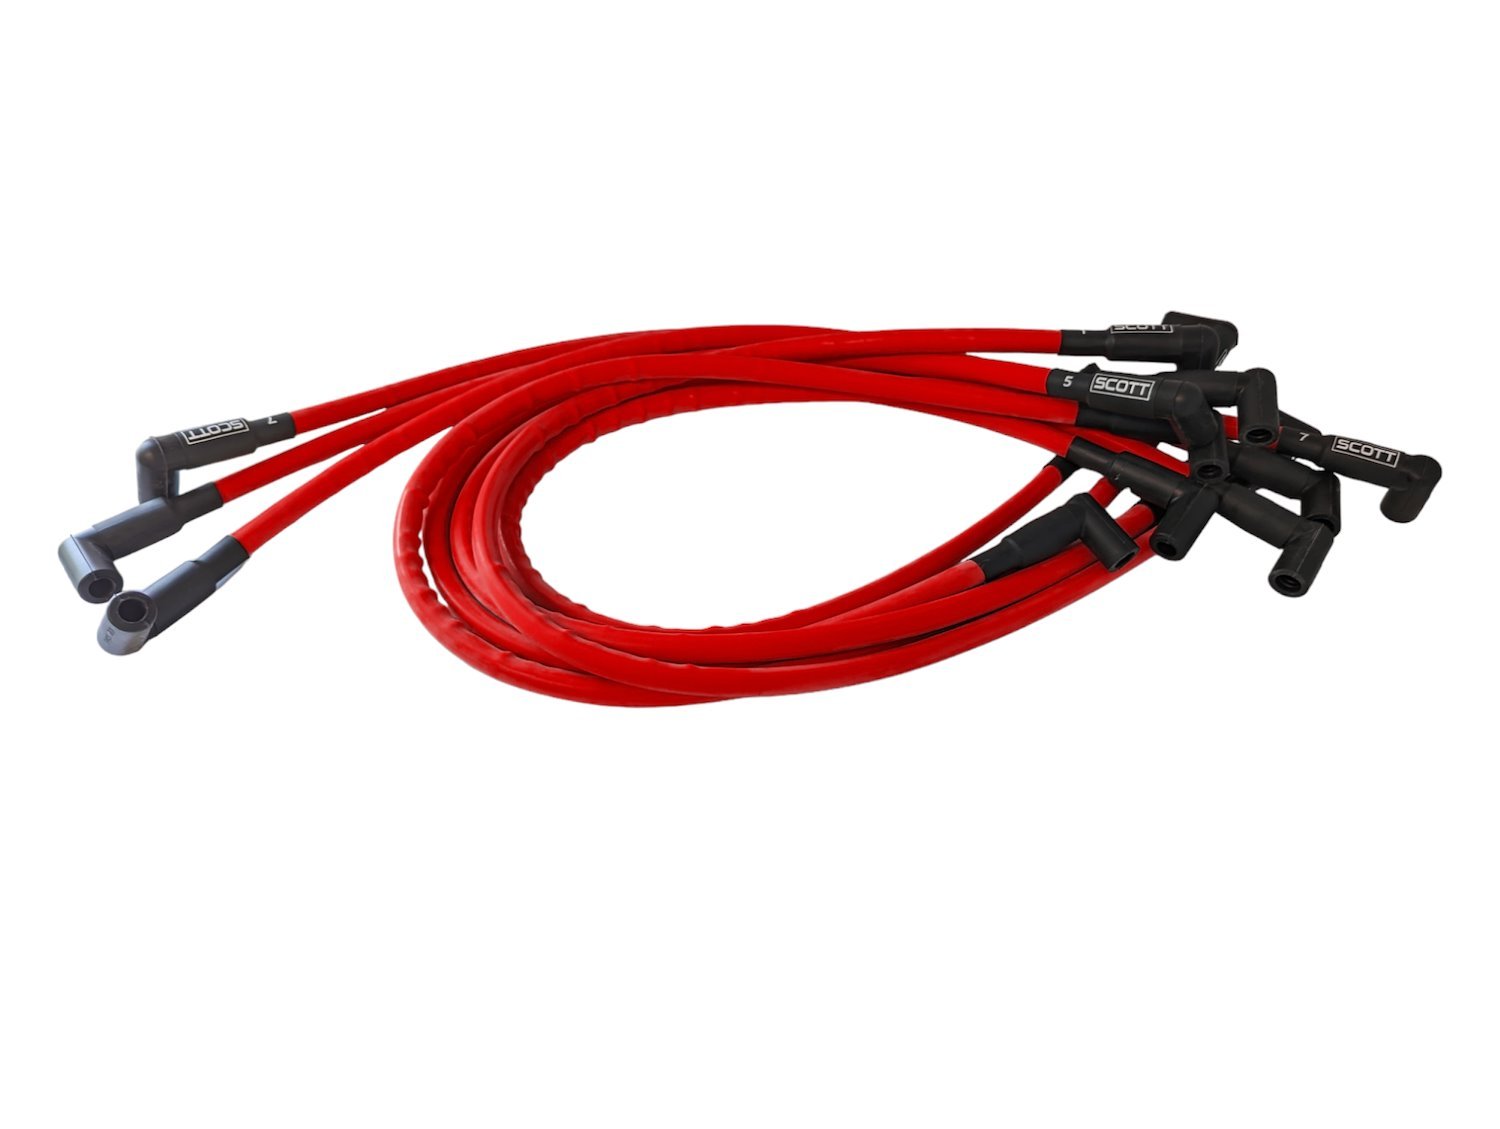 SPW-CH-604-2 High-Performance Silicone-Sleeved Spark Plug Wire Set for Small Block Chevy 604 Crate, Under Header [Red]